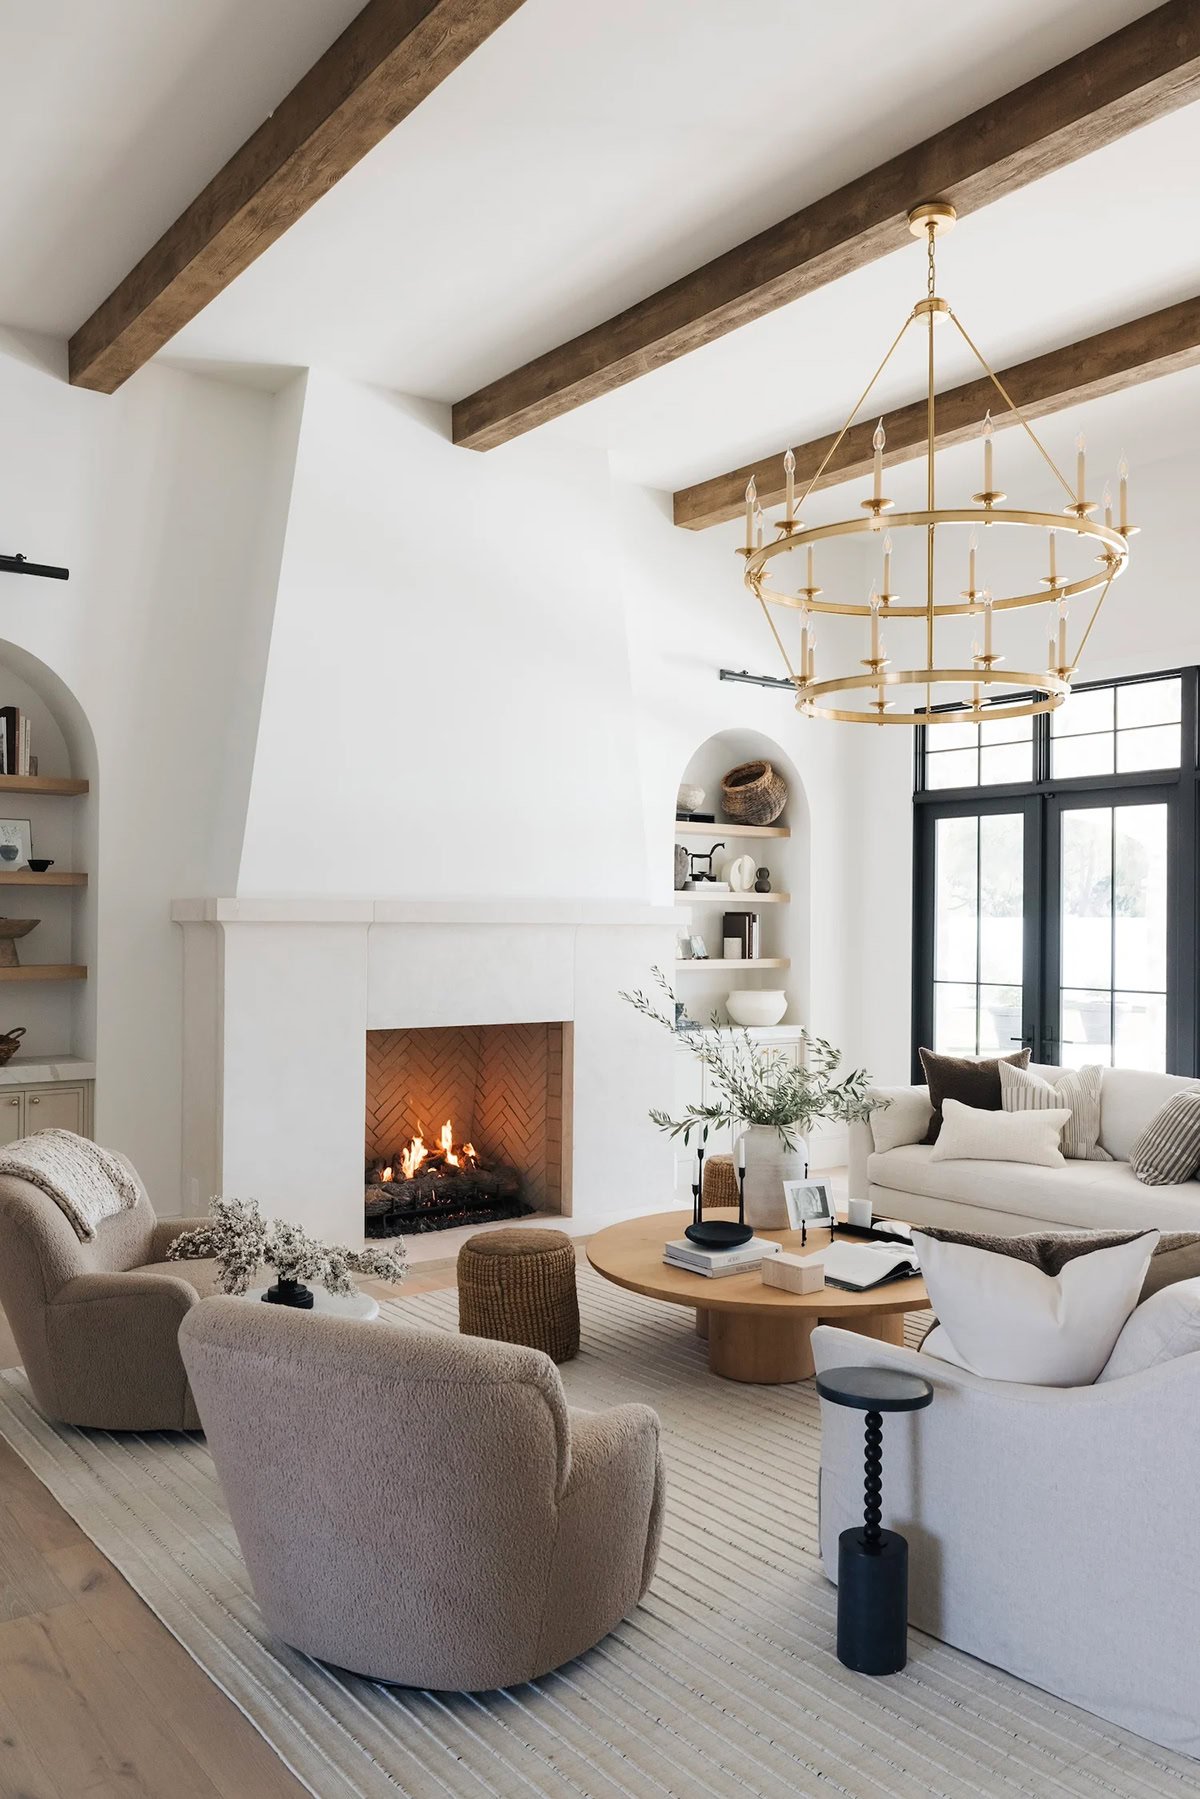 modern living room with white walls, ceiling beams and neutral furniture.